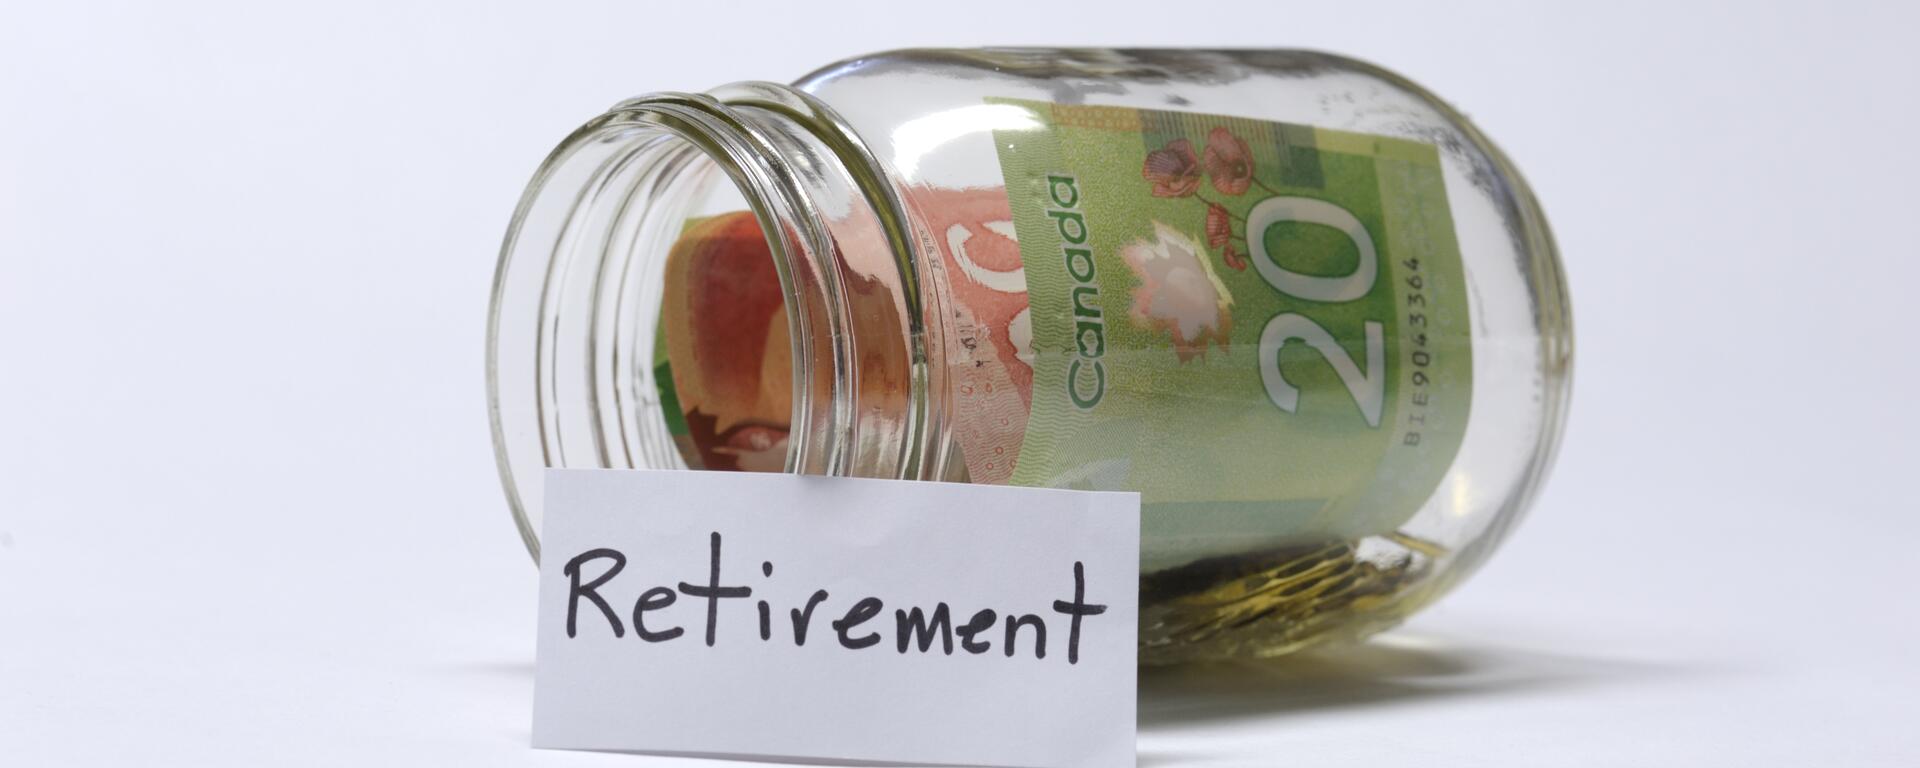 A photograph of a jar with money in it, with a sheet of paper that says "retirement" on it.